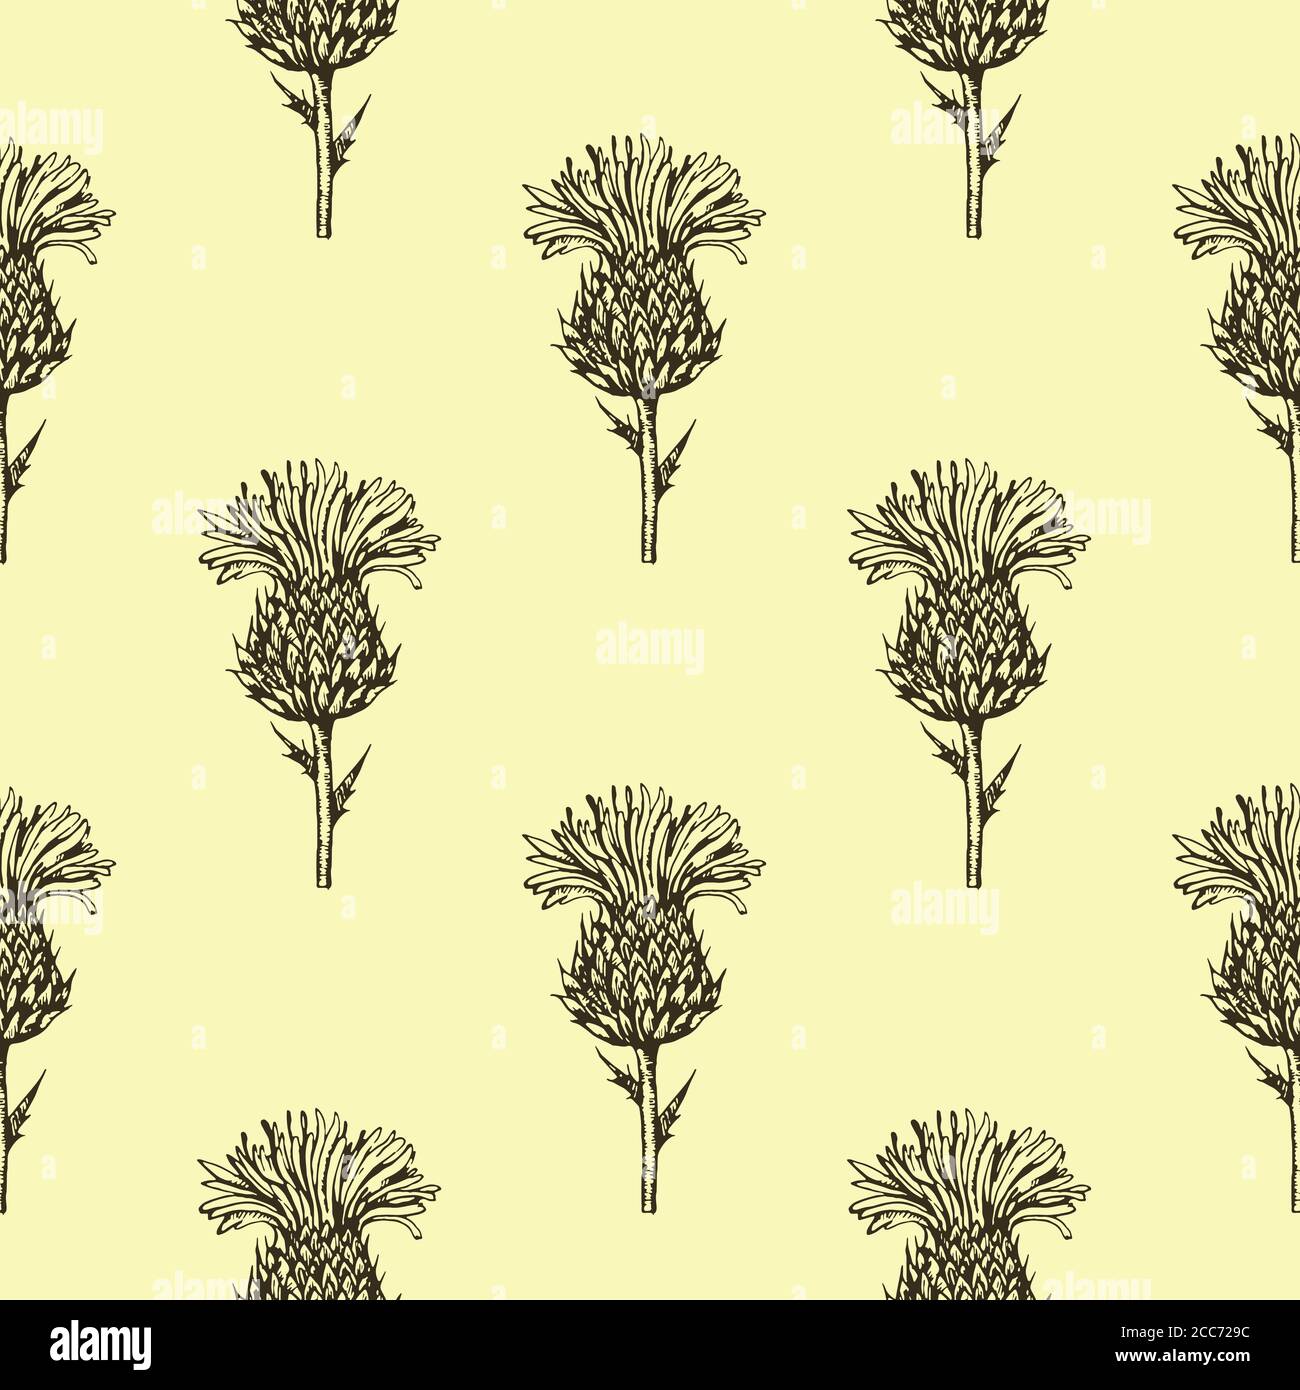 Seamless pattern with thistle flowers. Black and white ink engraving illustration.  Stock Vector